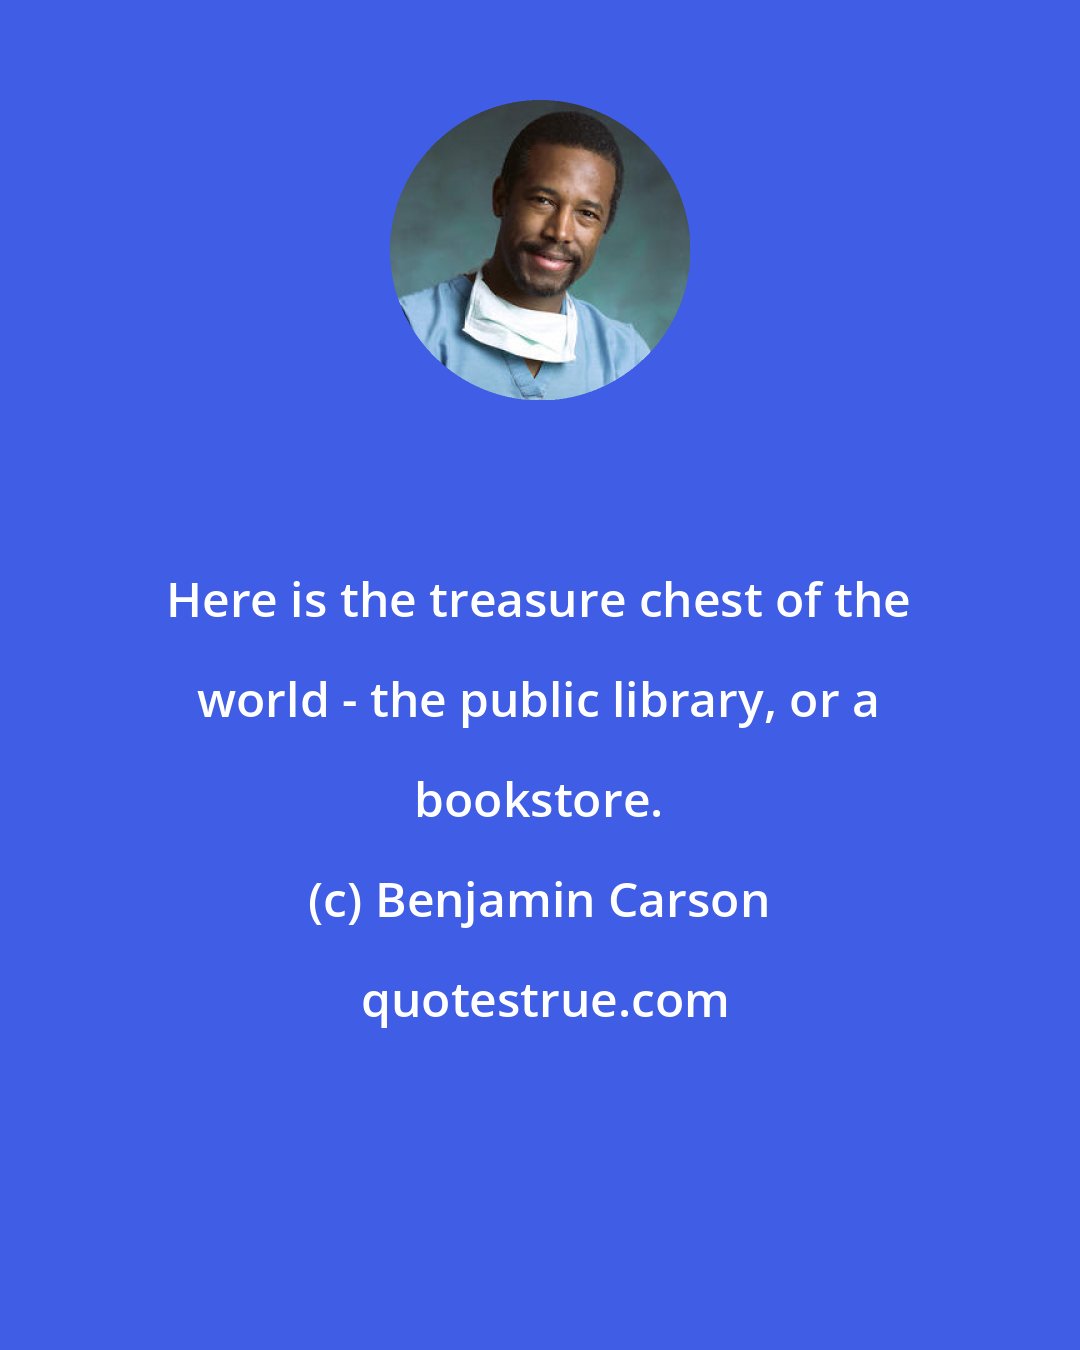 Benjamin Carson: Here is the treasure chest of the world - the public library, or a bookstore.